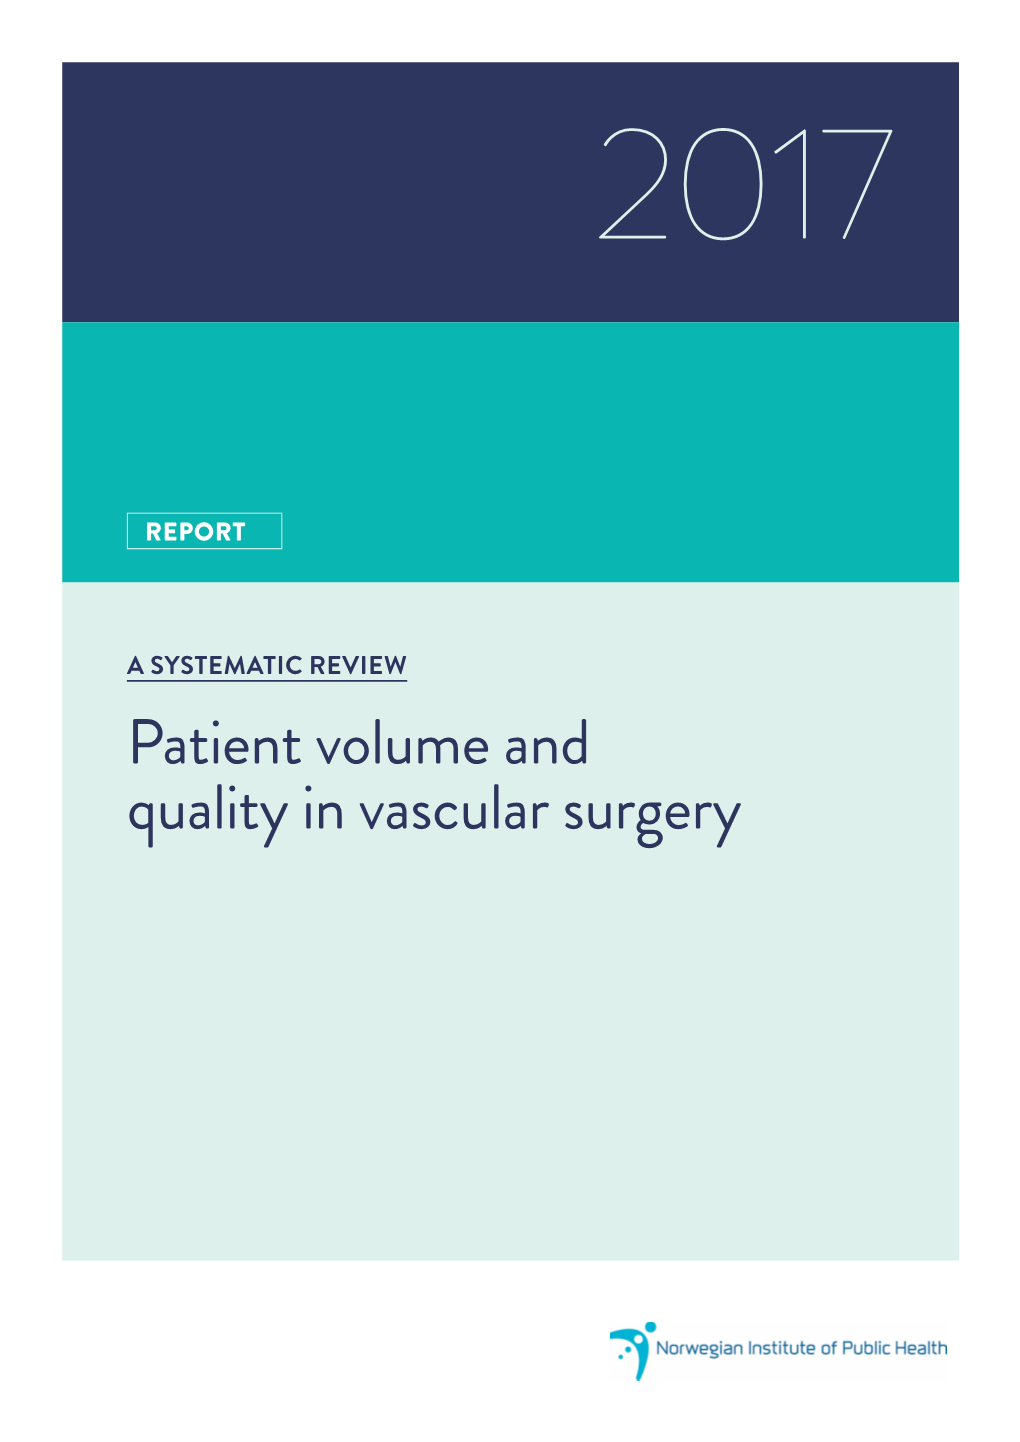 Patient Volume and Quality in Vascular Surgery: a Systematic Review